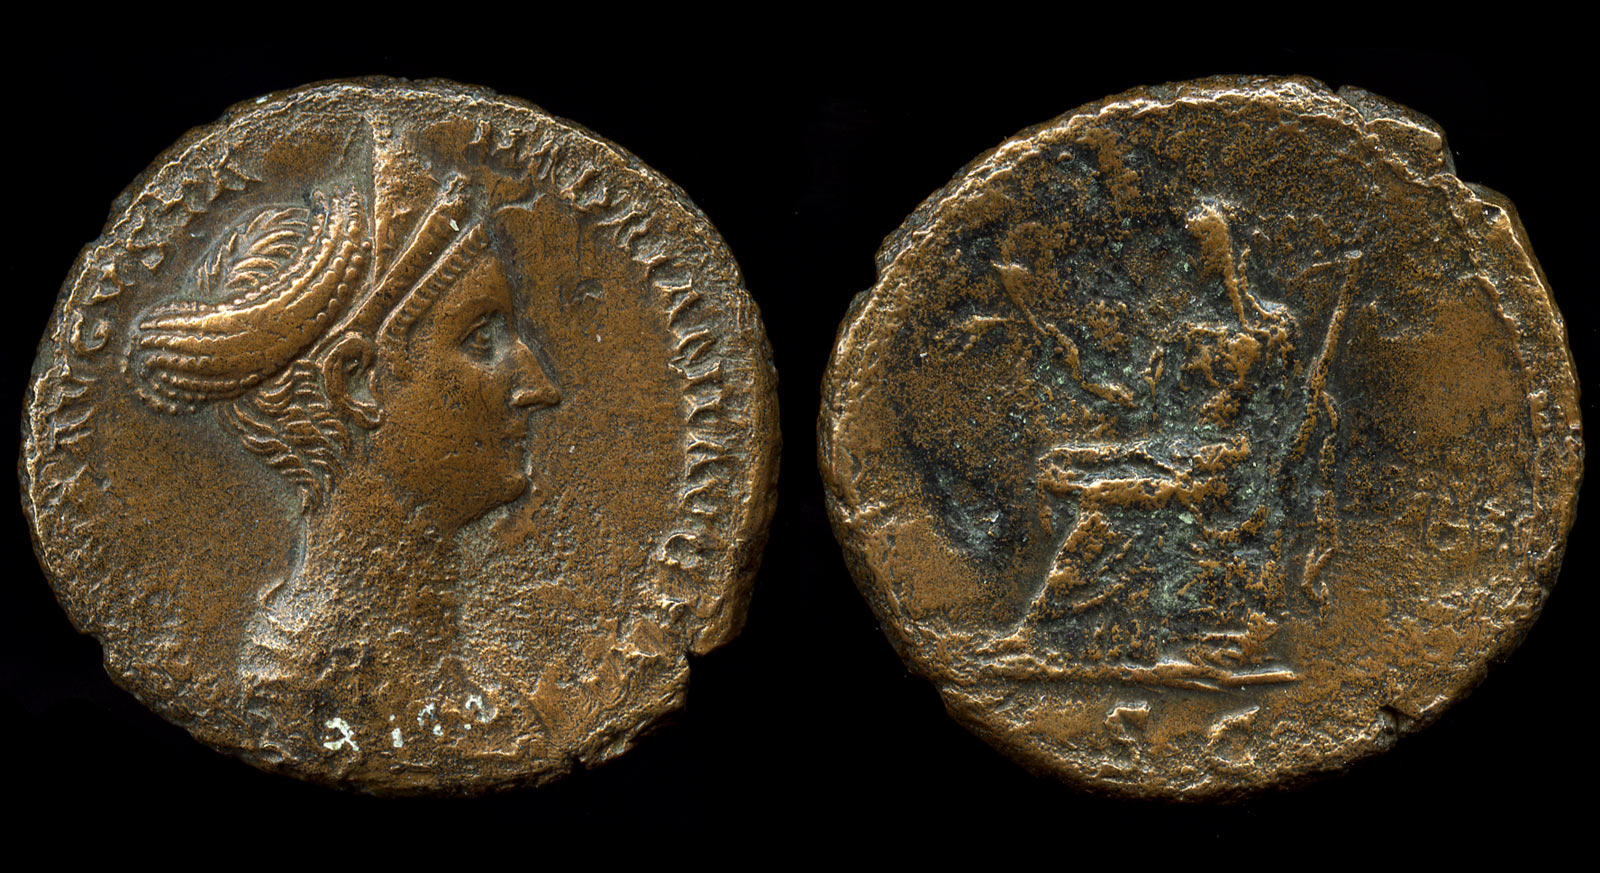 Copper alloy coin of Sabina. From around the time of the fateful tour of Egypt in 130 CE. The seated figure is Ceres, goddess of agriculture and fertility’